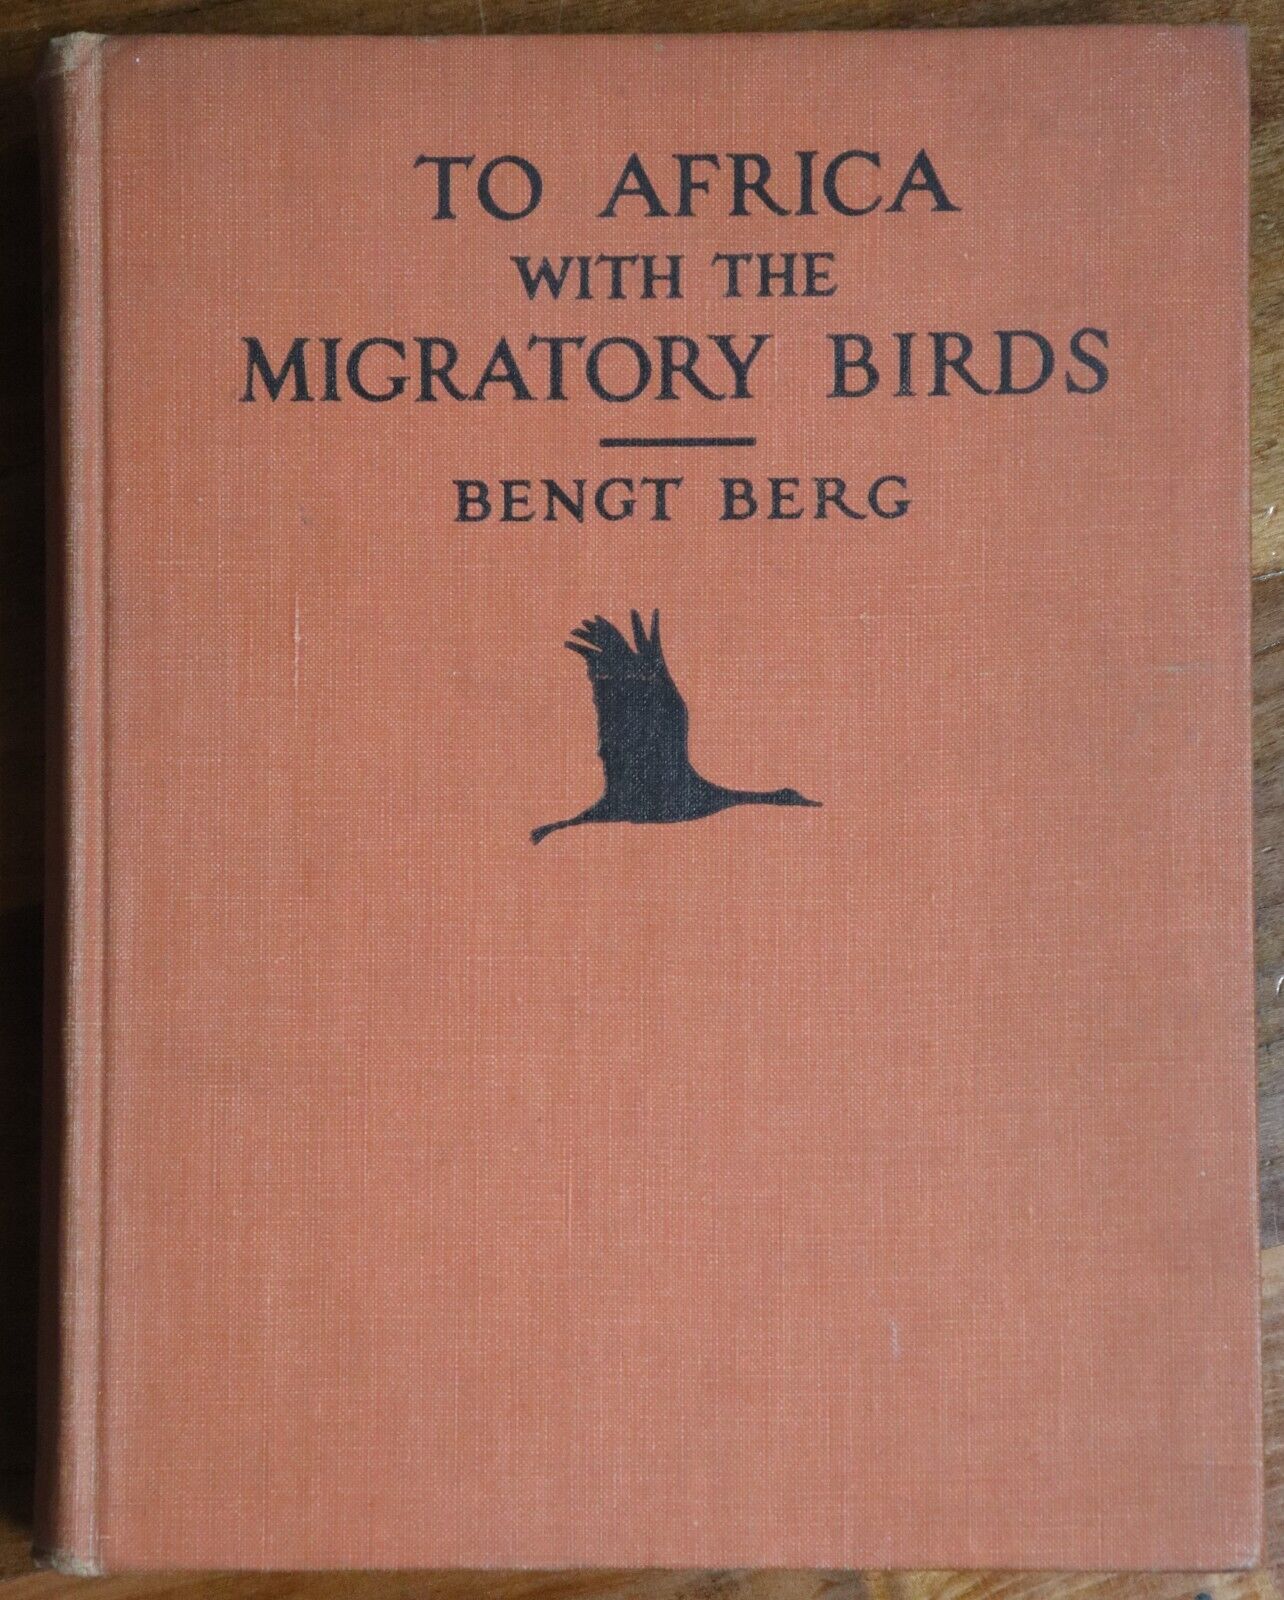 To Africa With The Migratory Birds - 1930 - Antique Book - 1st Edition